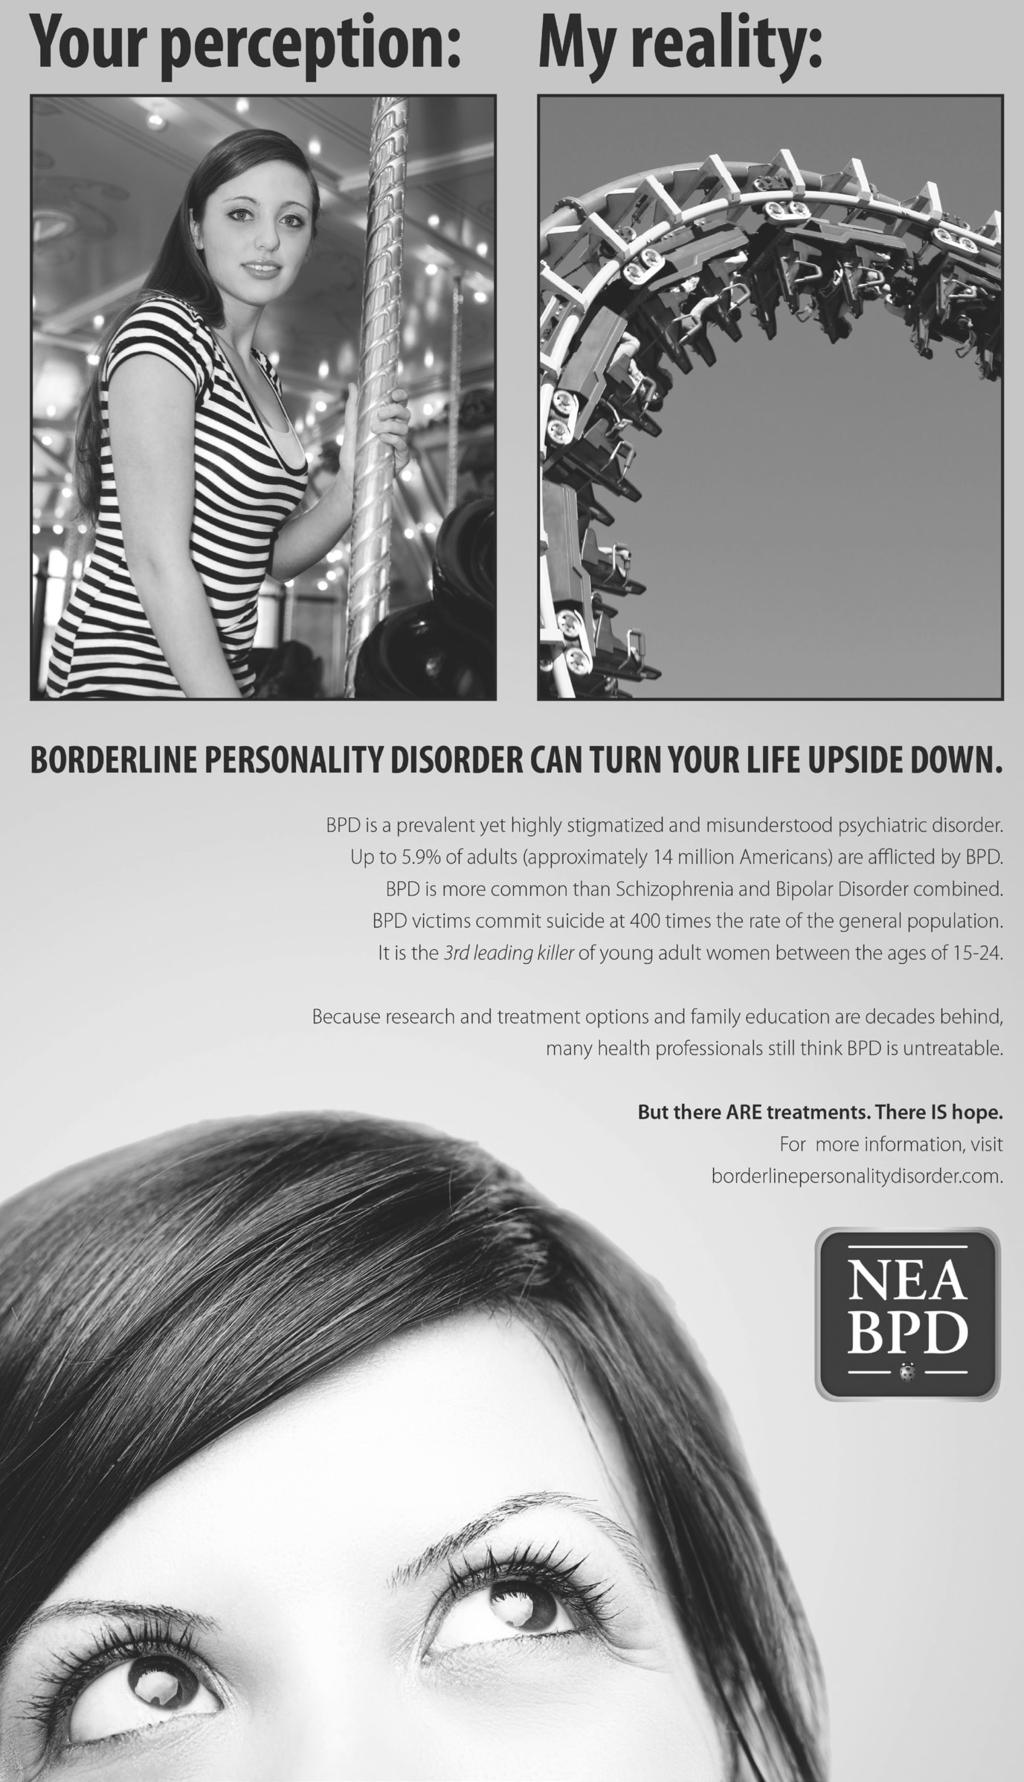 May is Borderline Personality Disorder Awareness Month www.borderlinepersonalitydisorder.com Content from the Canadian Mental Health Association - www.cmha.bc.